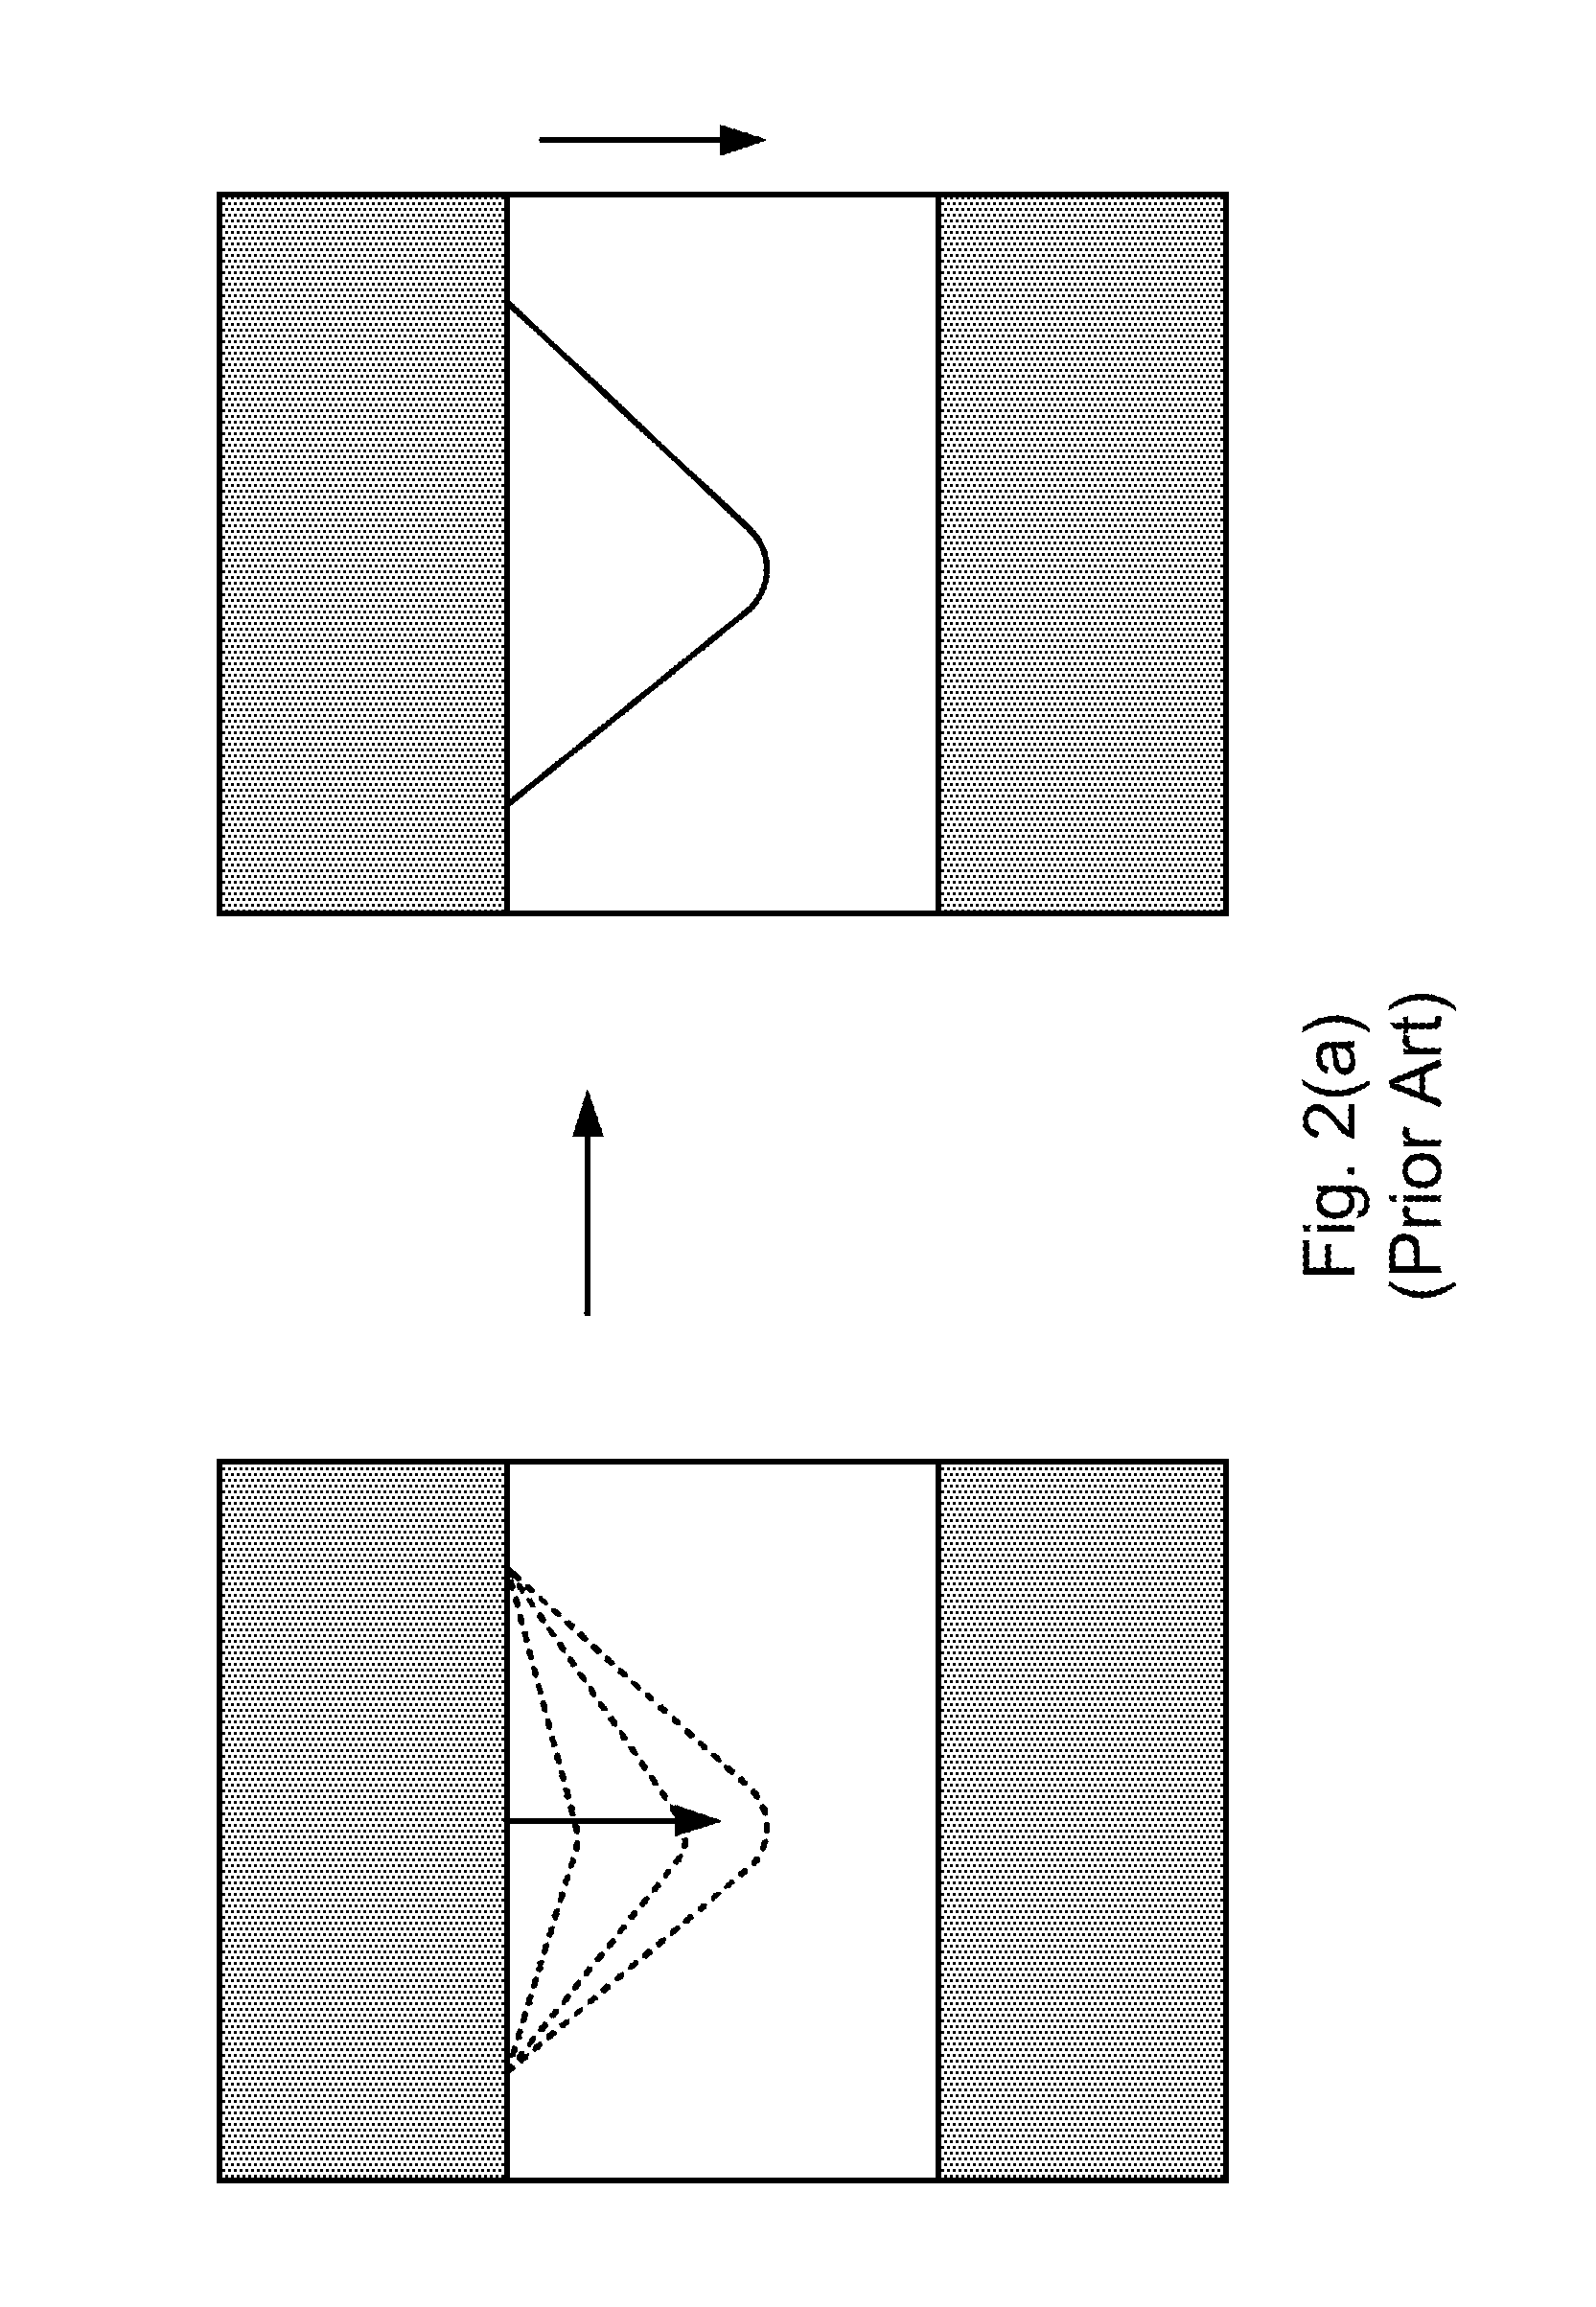 Conductive path in switching material in a resistive random access memory device and control